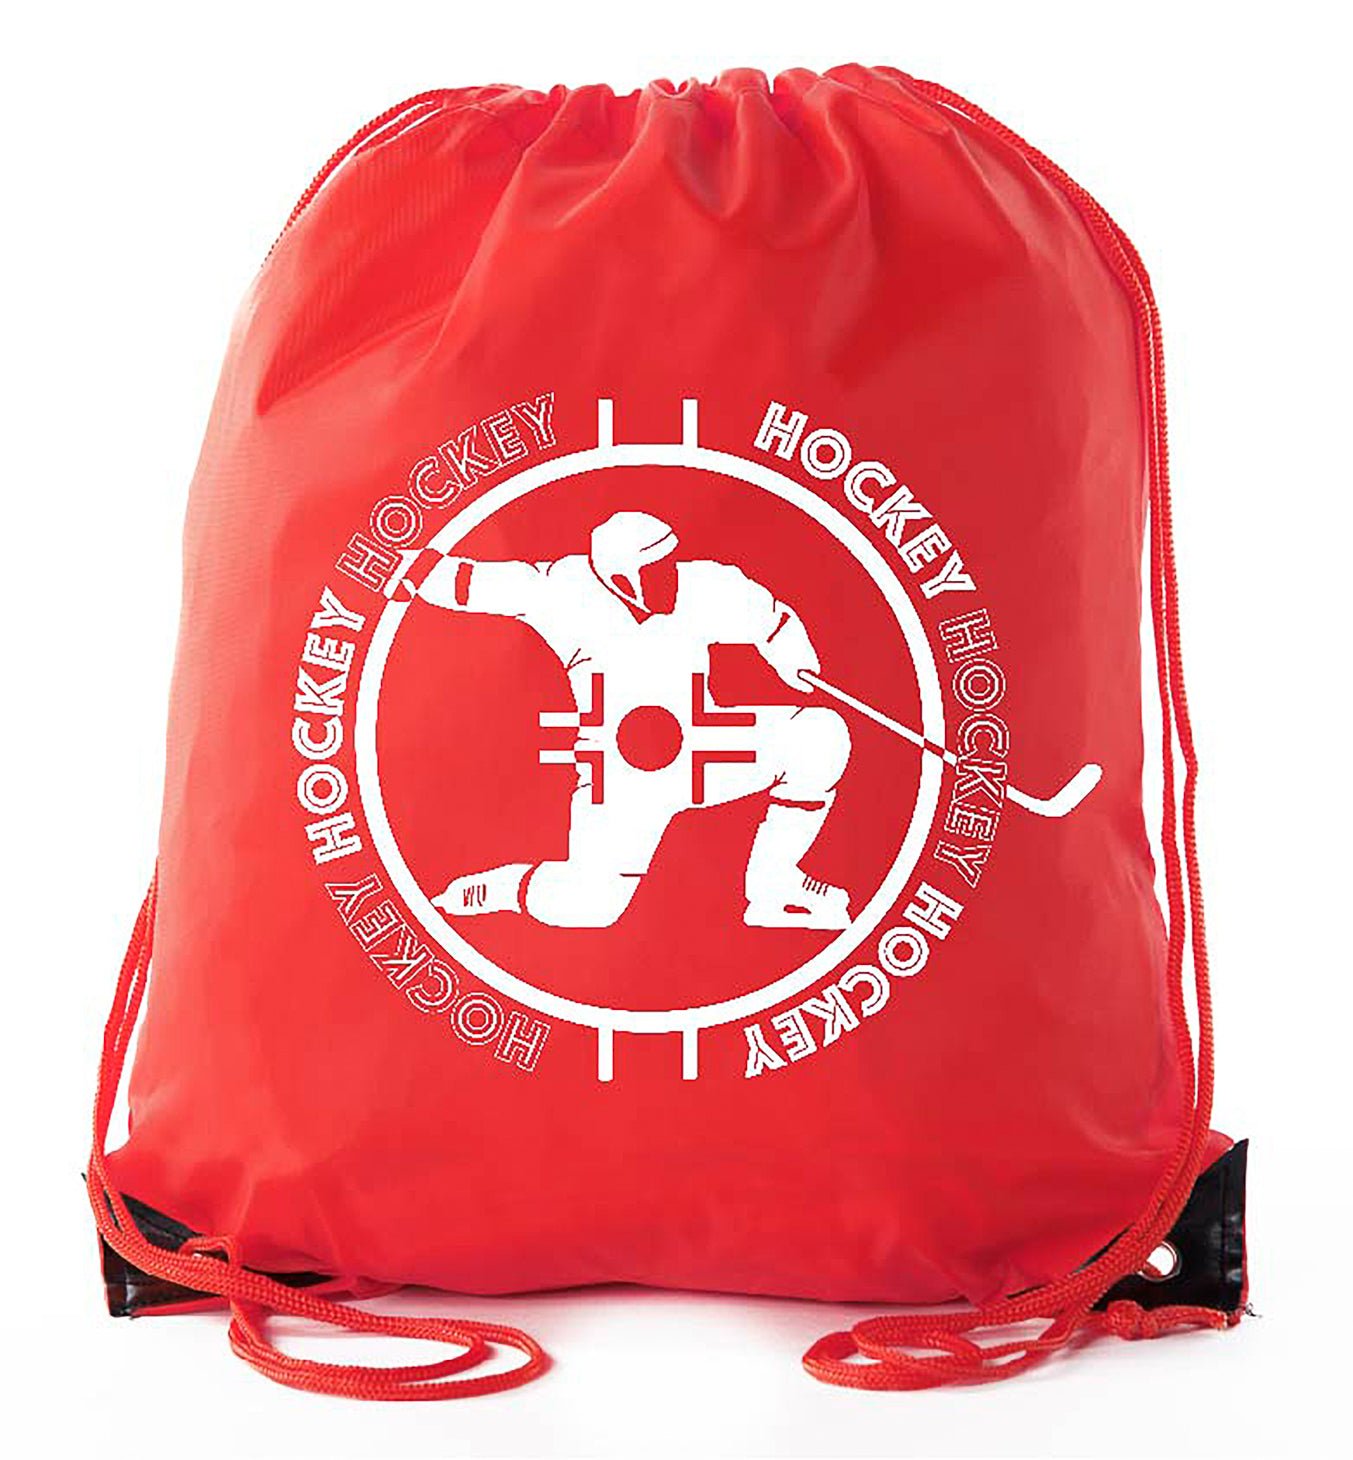 Celly in Faceoff Circle Polyester Hockey Drawstring Bag - Mato & Hash